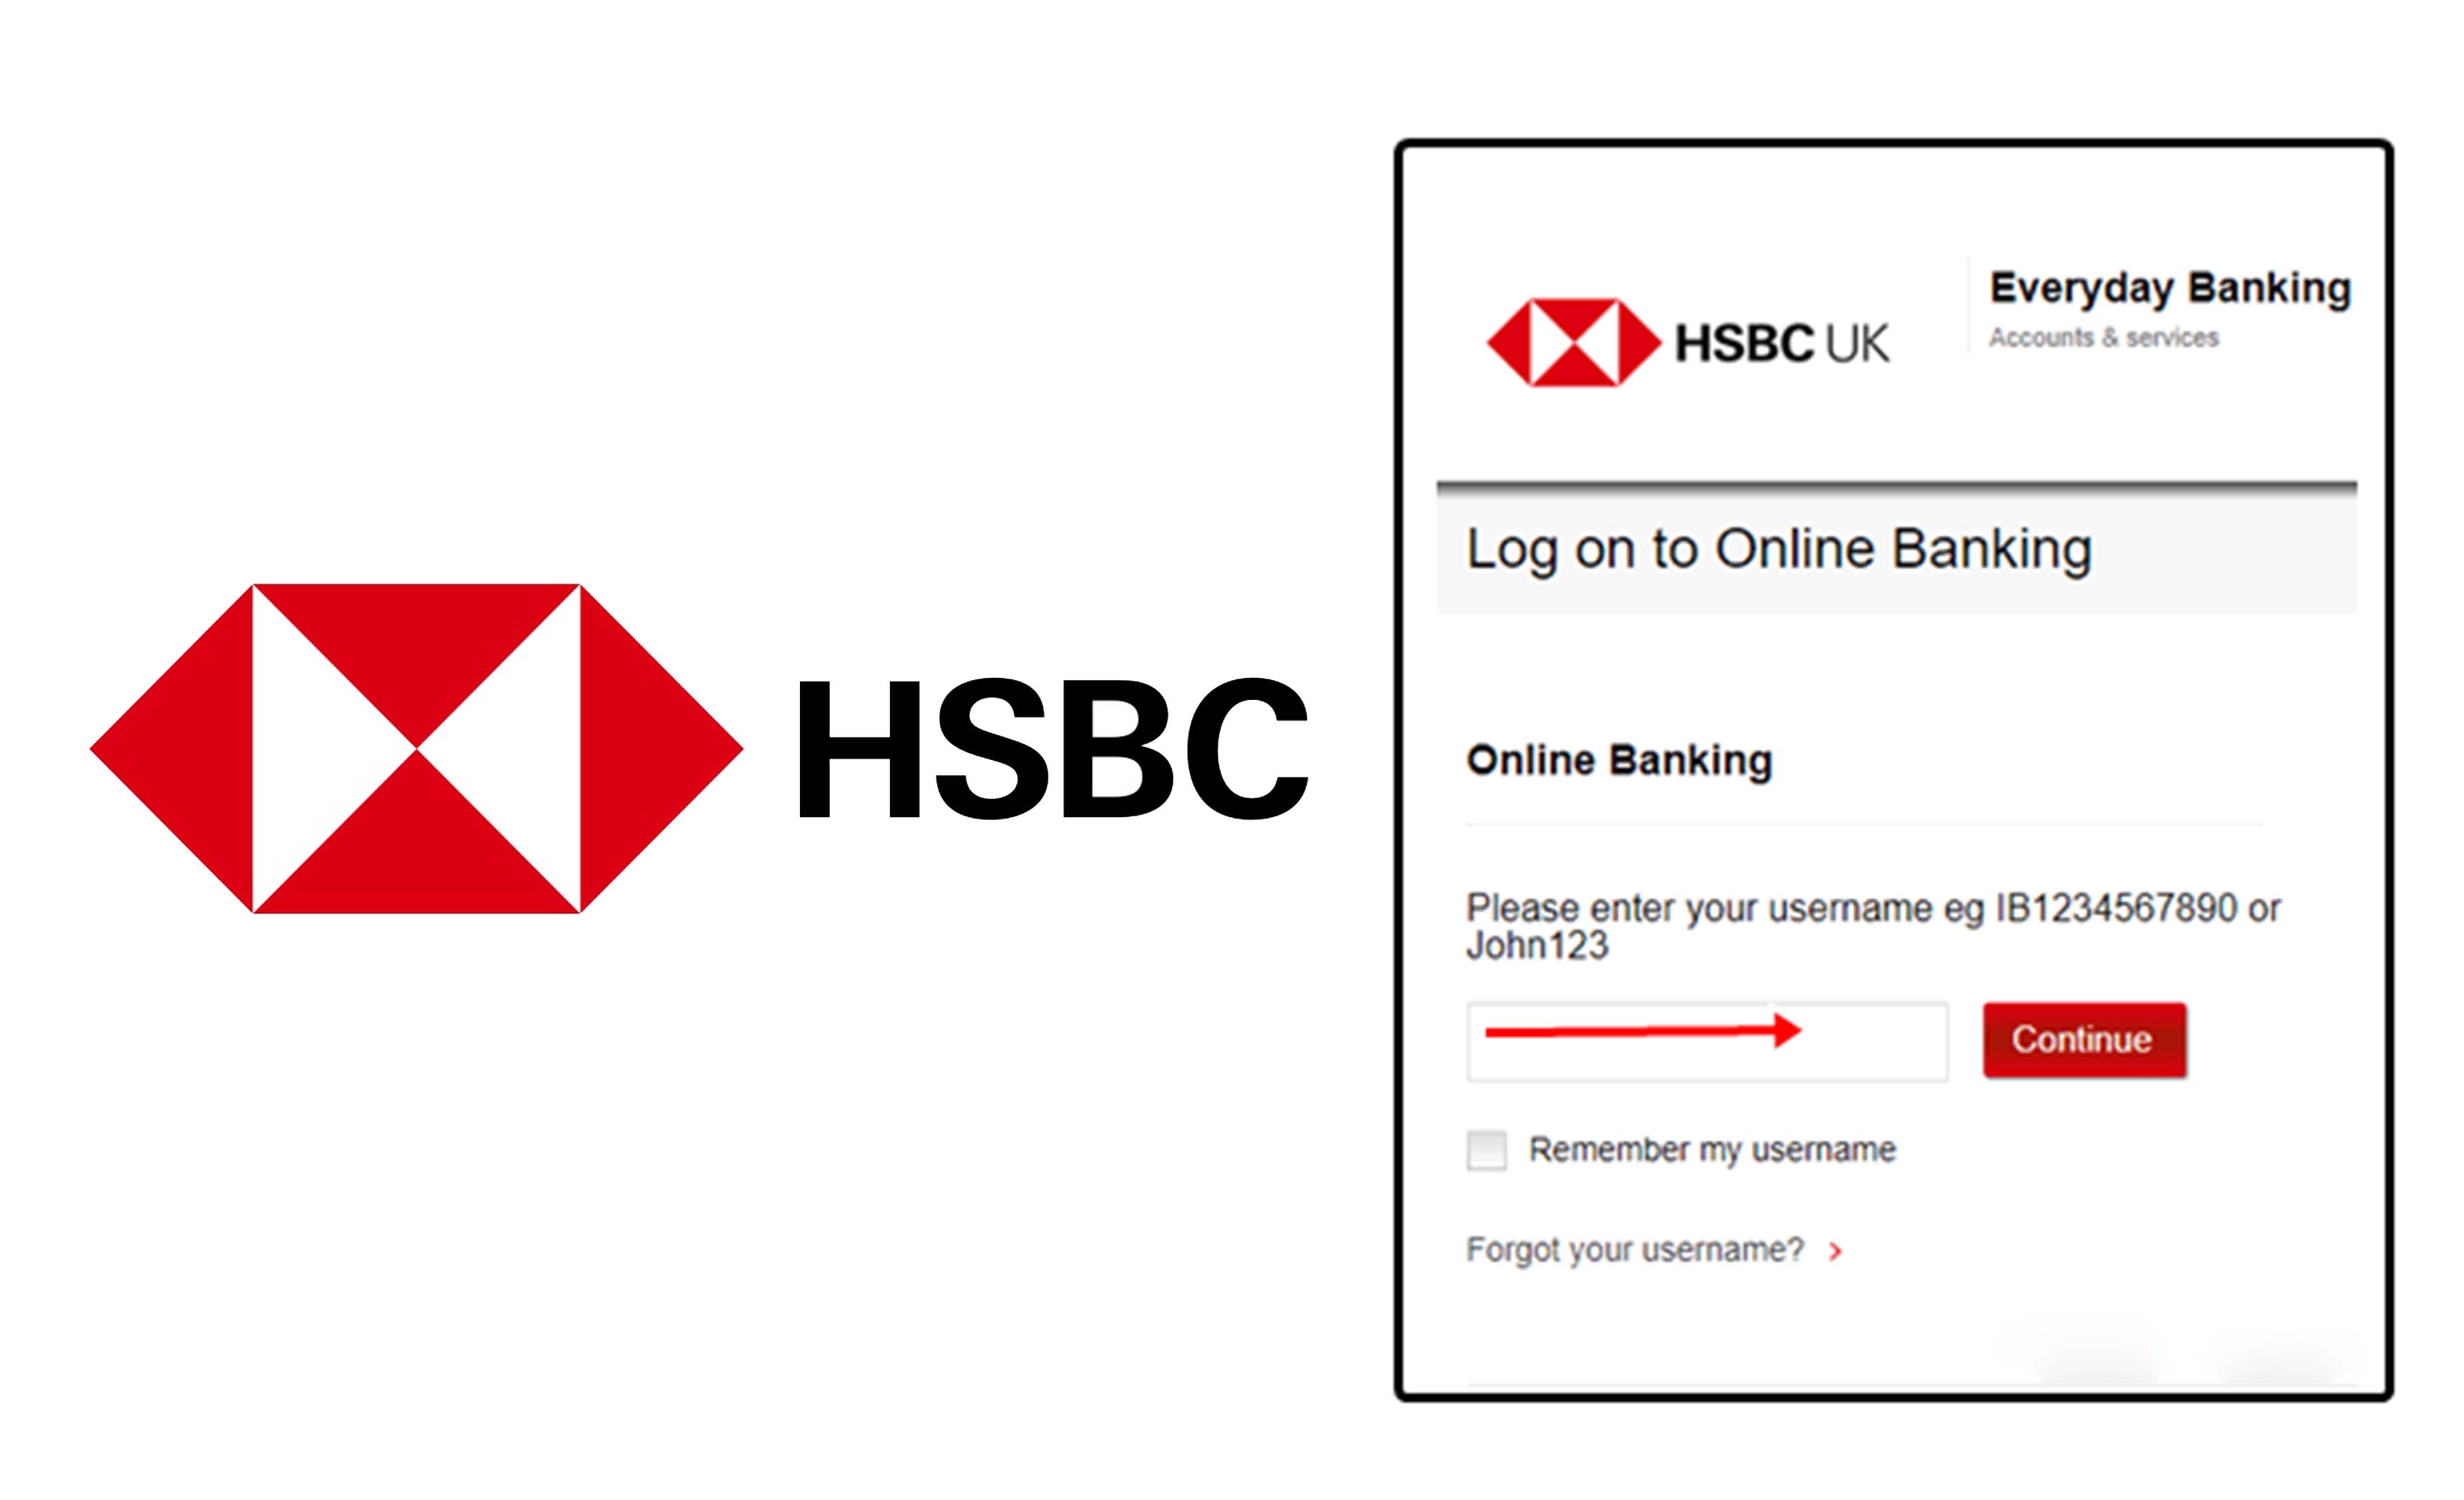 HSBC Login - Does HBSC Have a Mobile App?